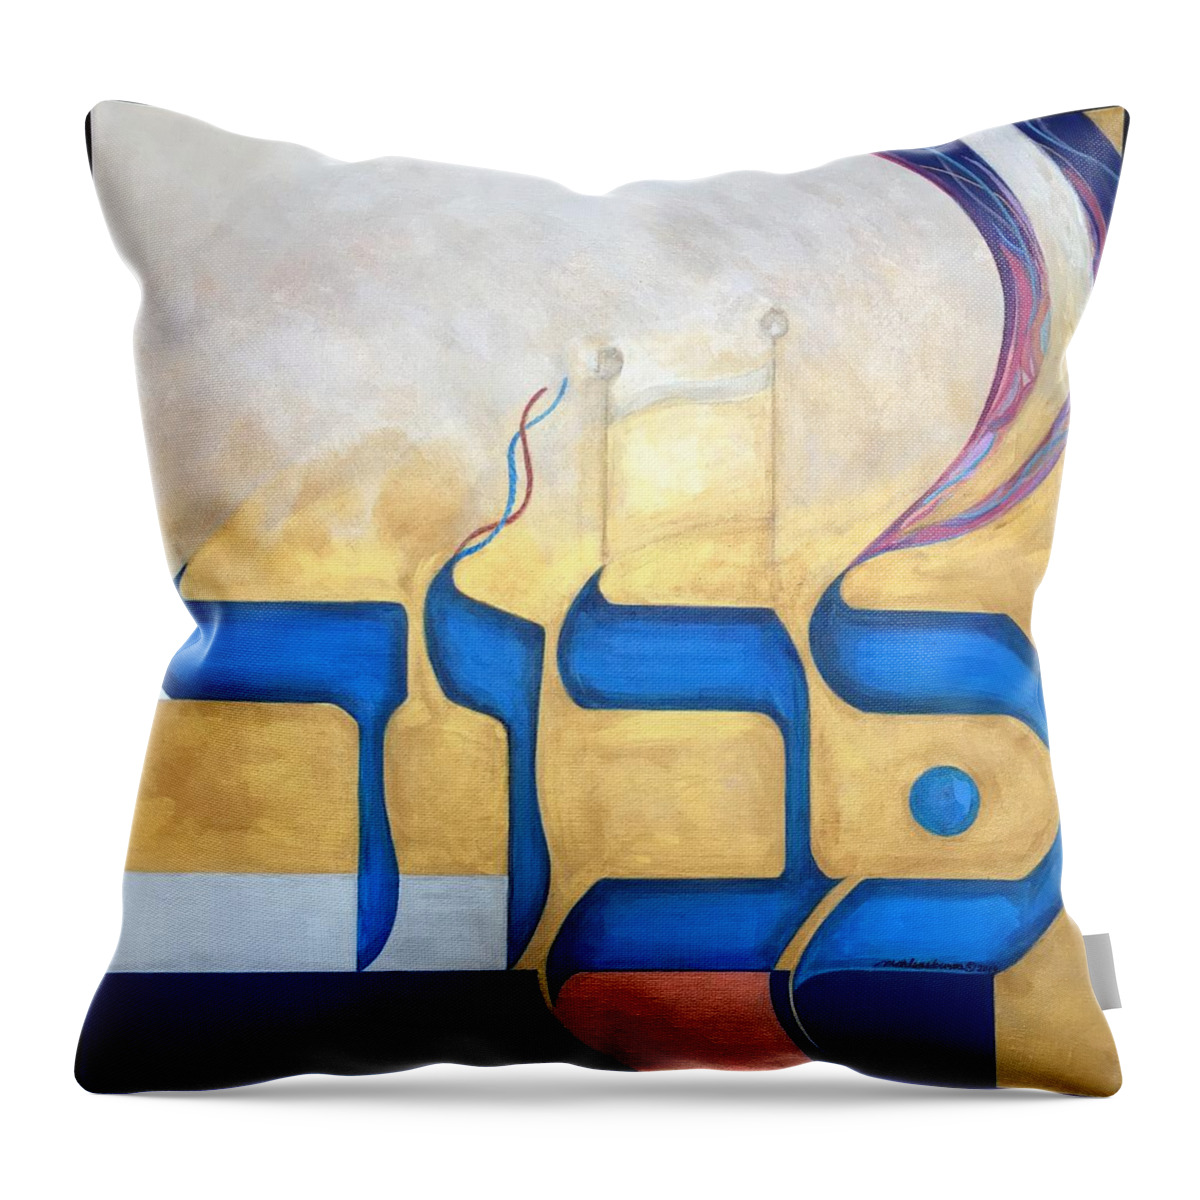 Kavod Throw Pillow featuring the painting Kavod by Marlene Burns